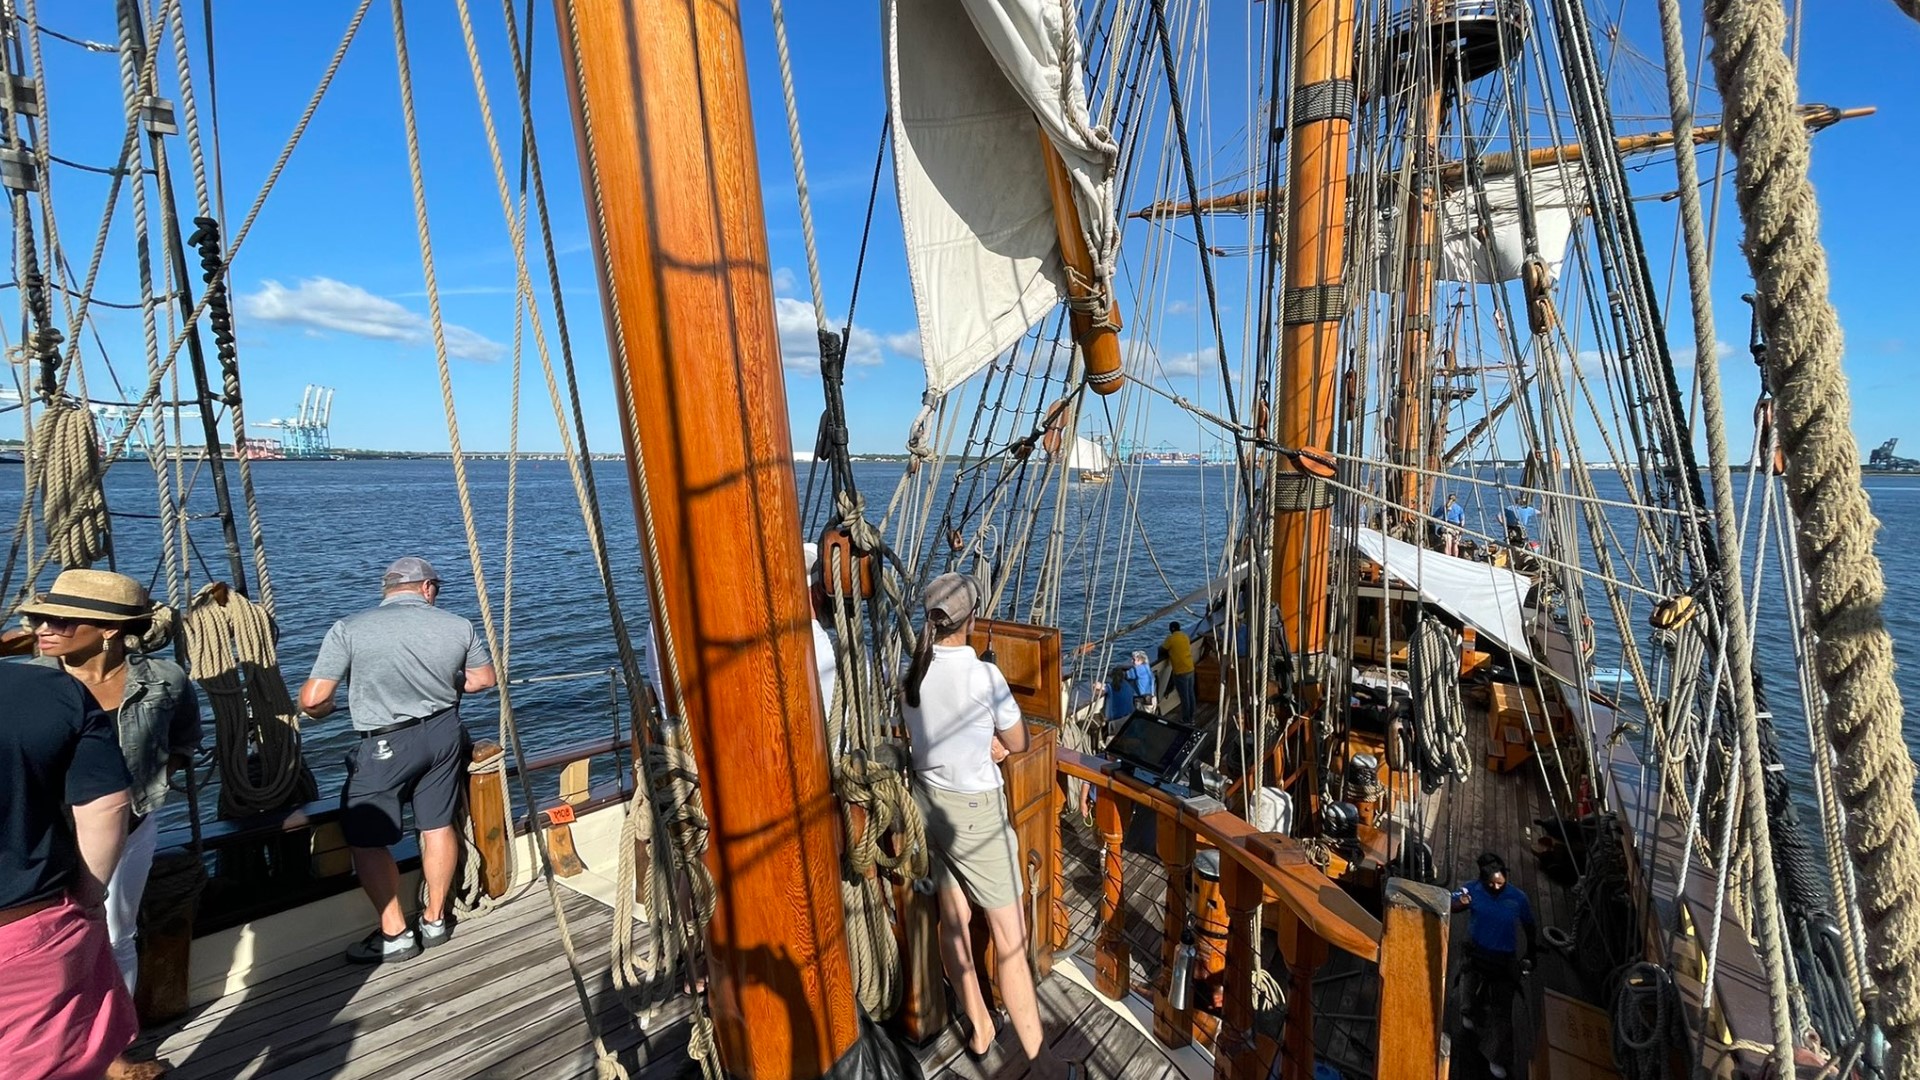 Everything from replicas of warships from hundreds of years ago to modern Navy destroyers wow onlookers as they participate in the Parade of Sail.